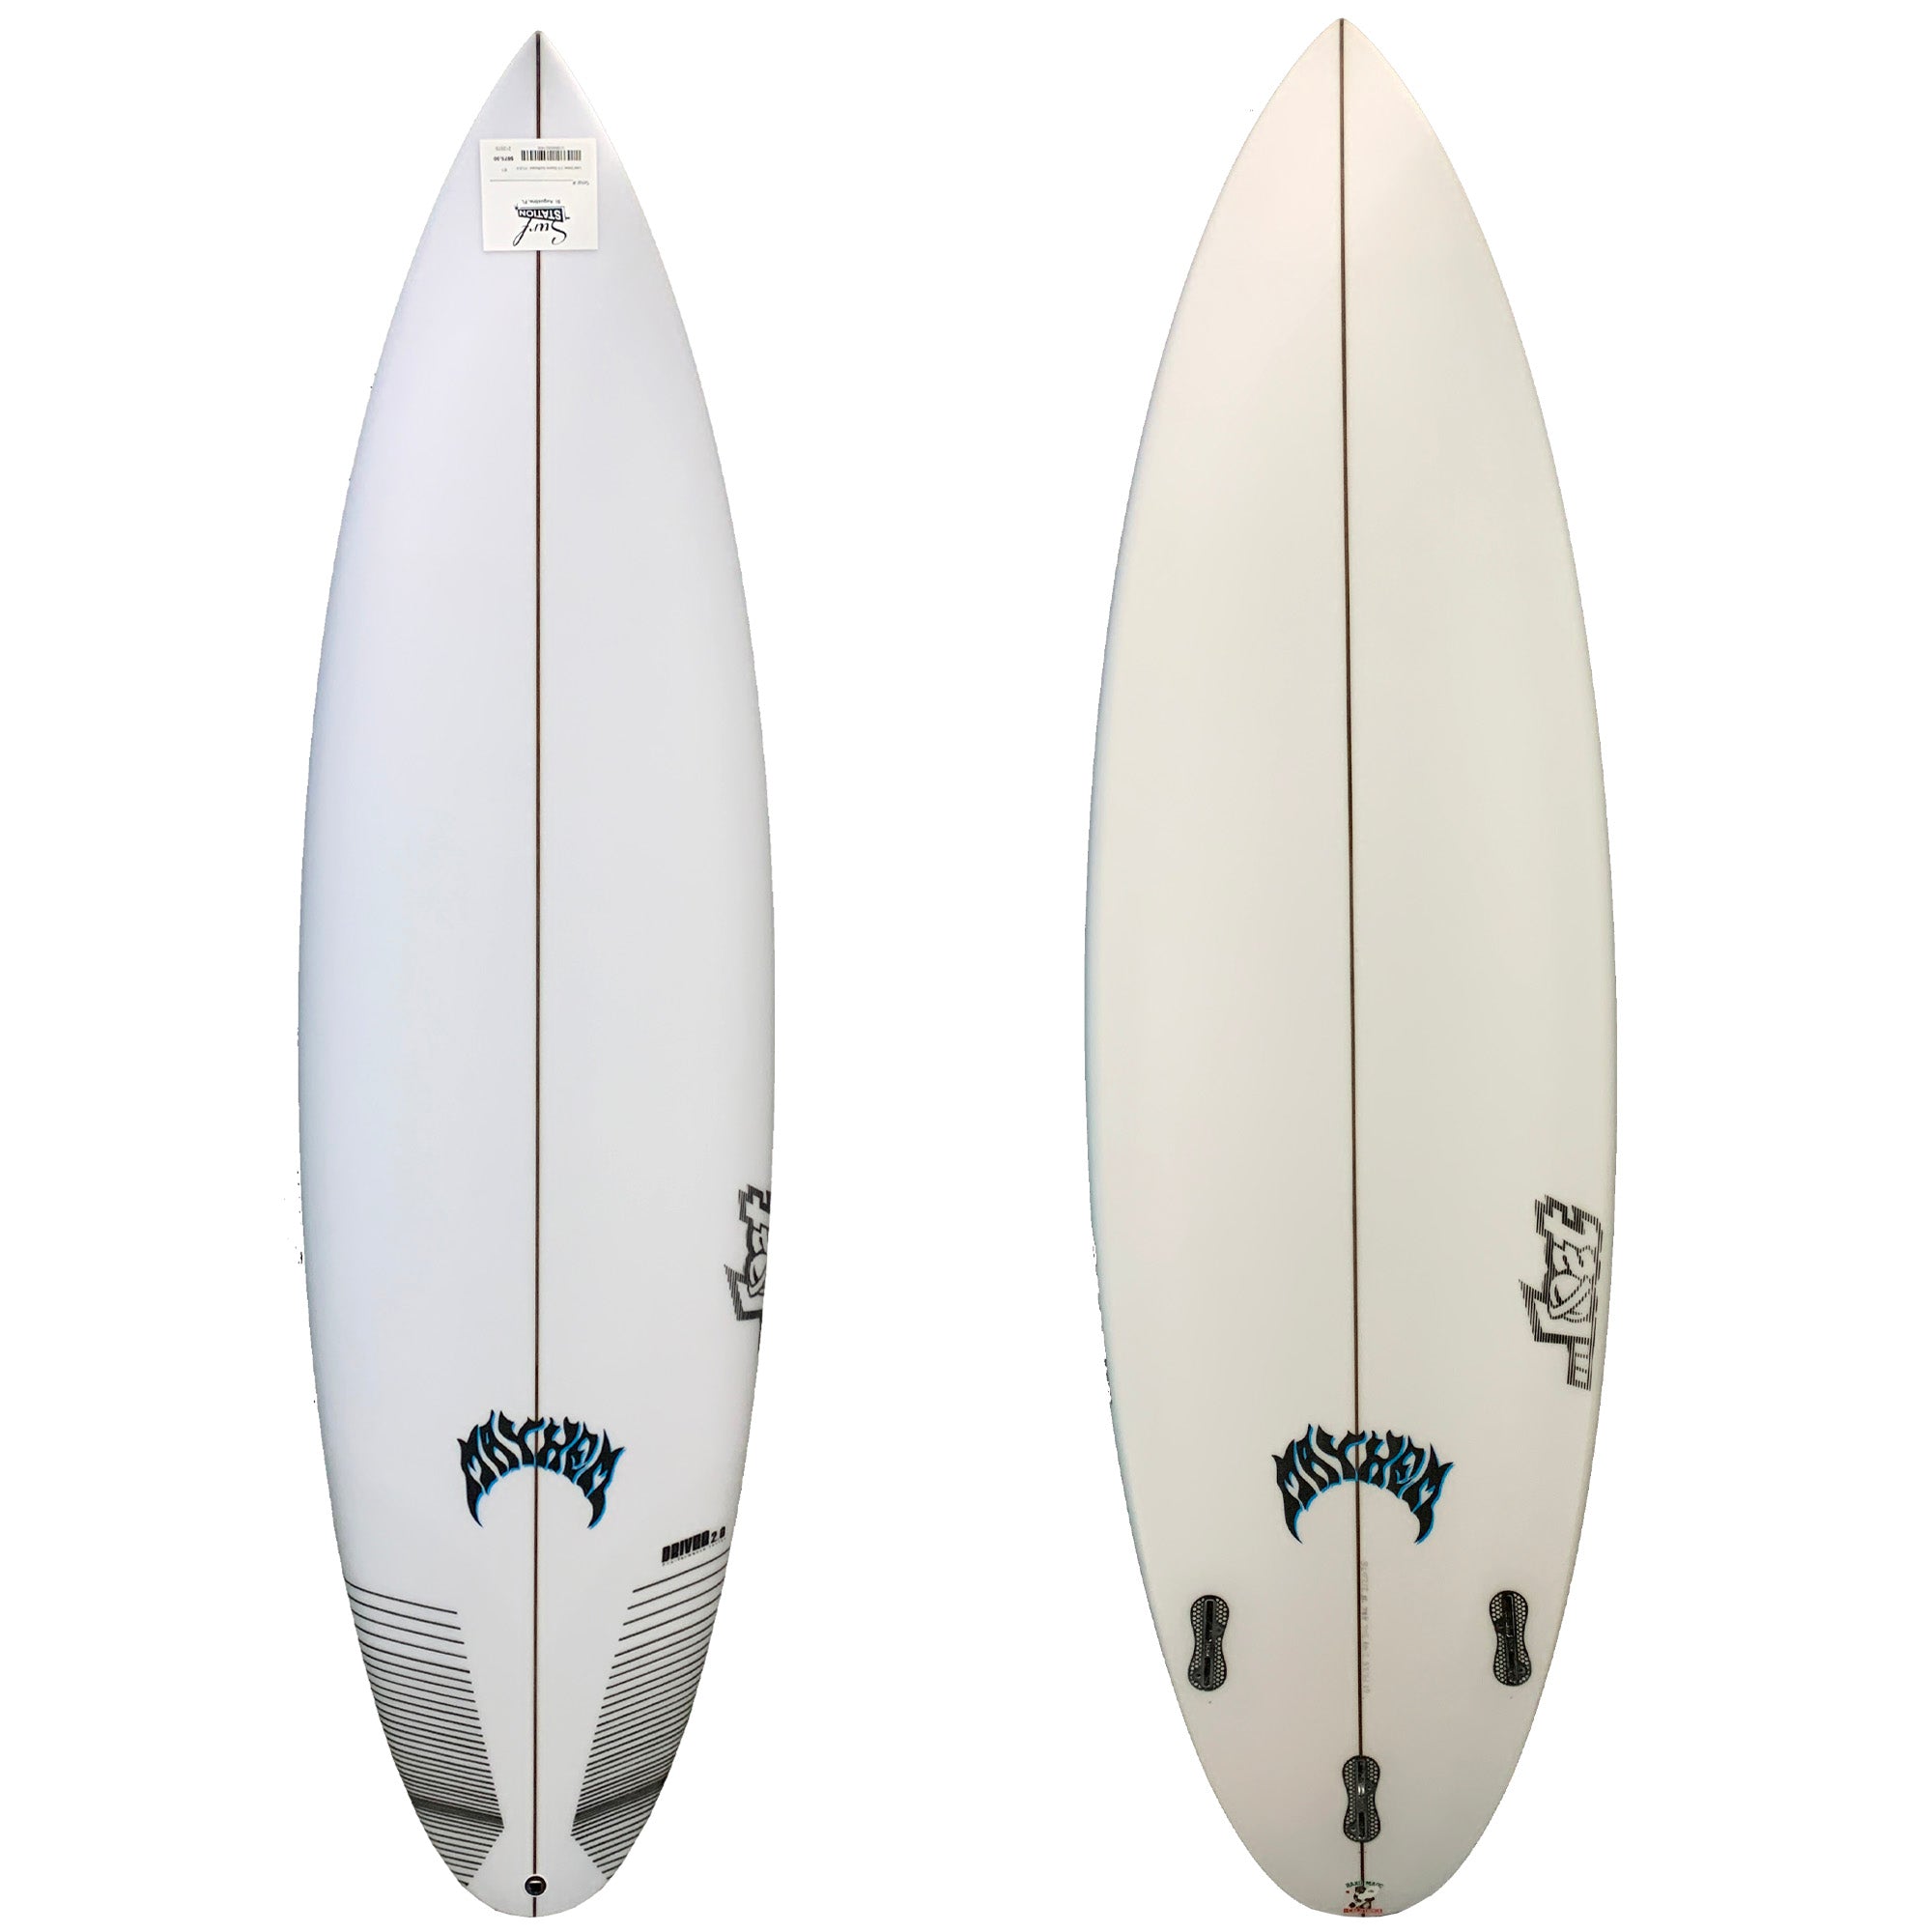 Lost Driver 2.0 Round Surfboard - FCS II